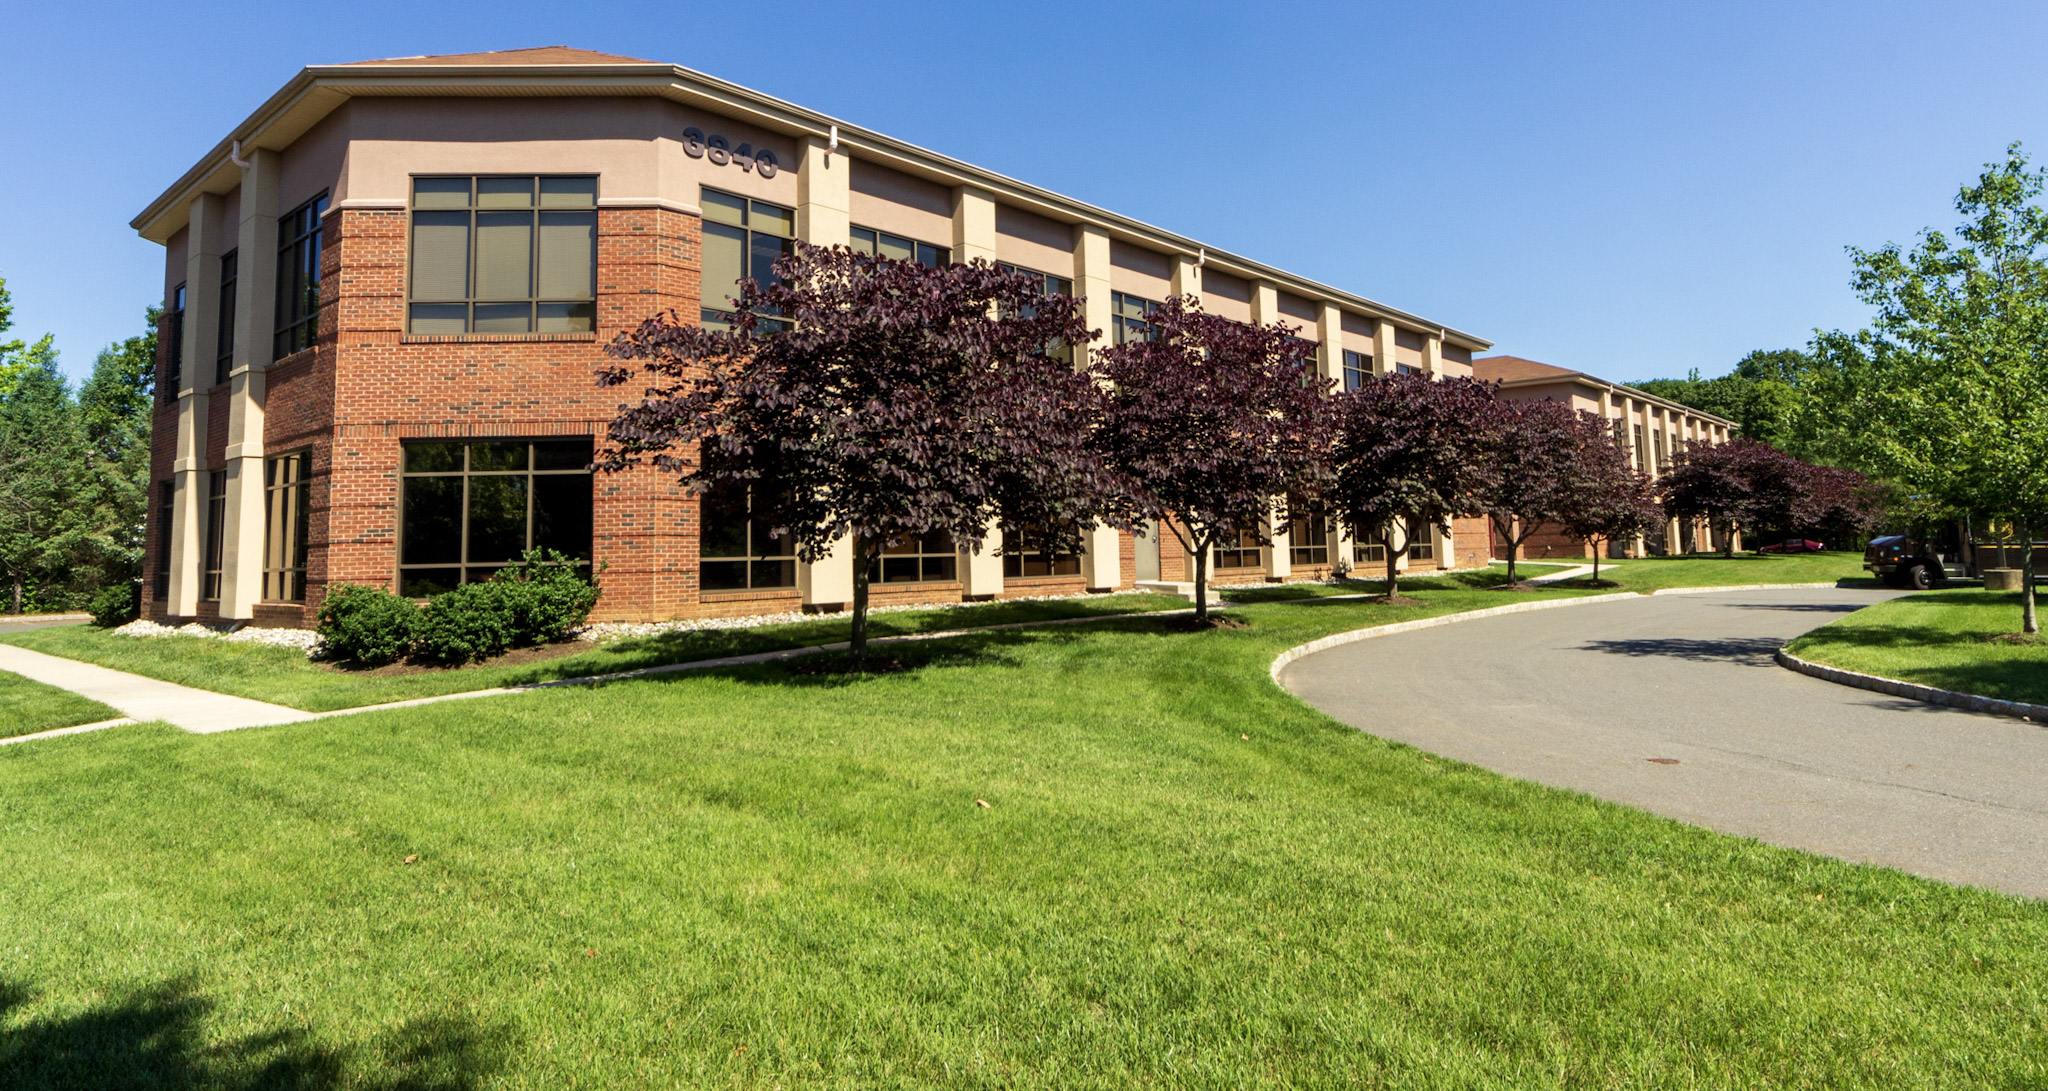 Fennelly Associates Negotiates Over 7,000 Square Feet of Office Deals at Hamilton, N.J. Corporate Campus